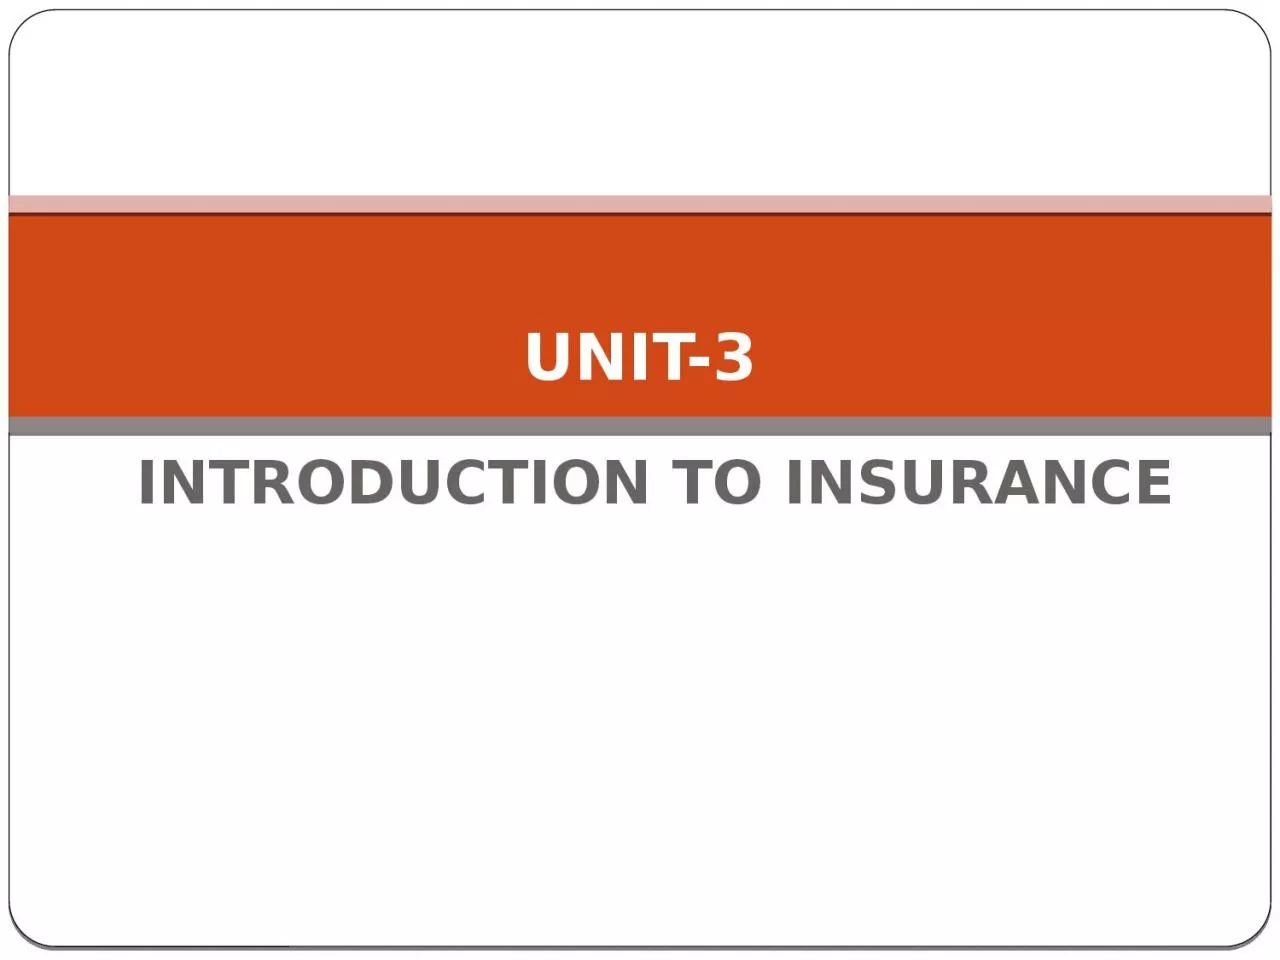 INTRODUCTION TO INSURANCE